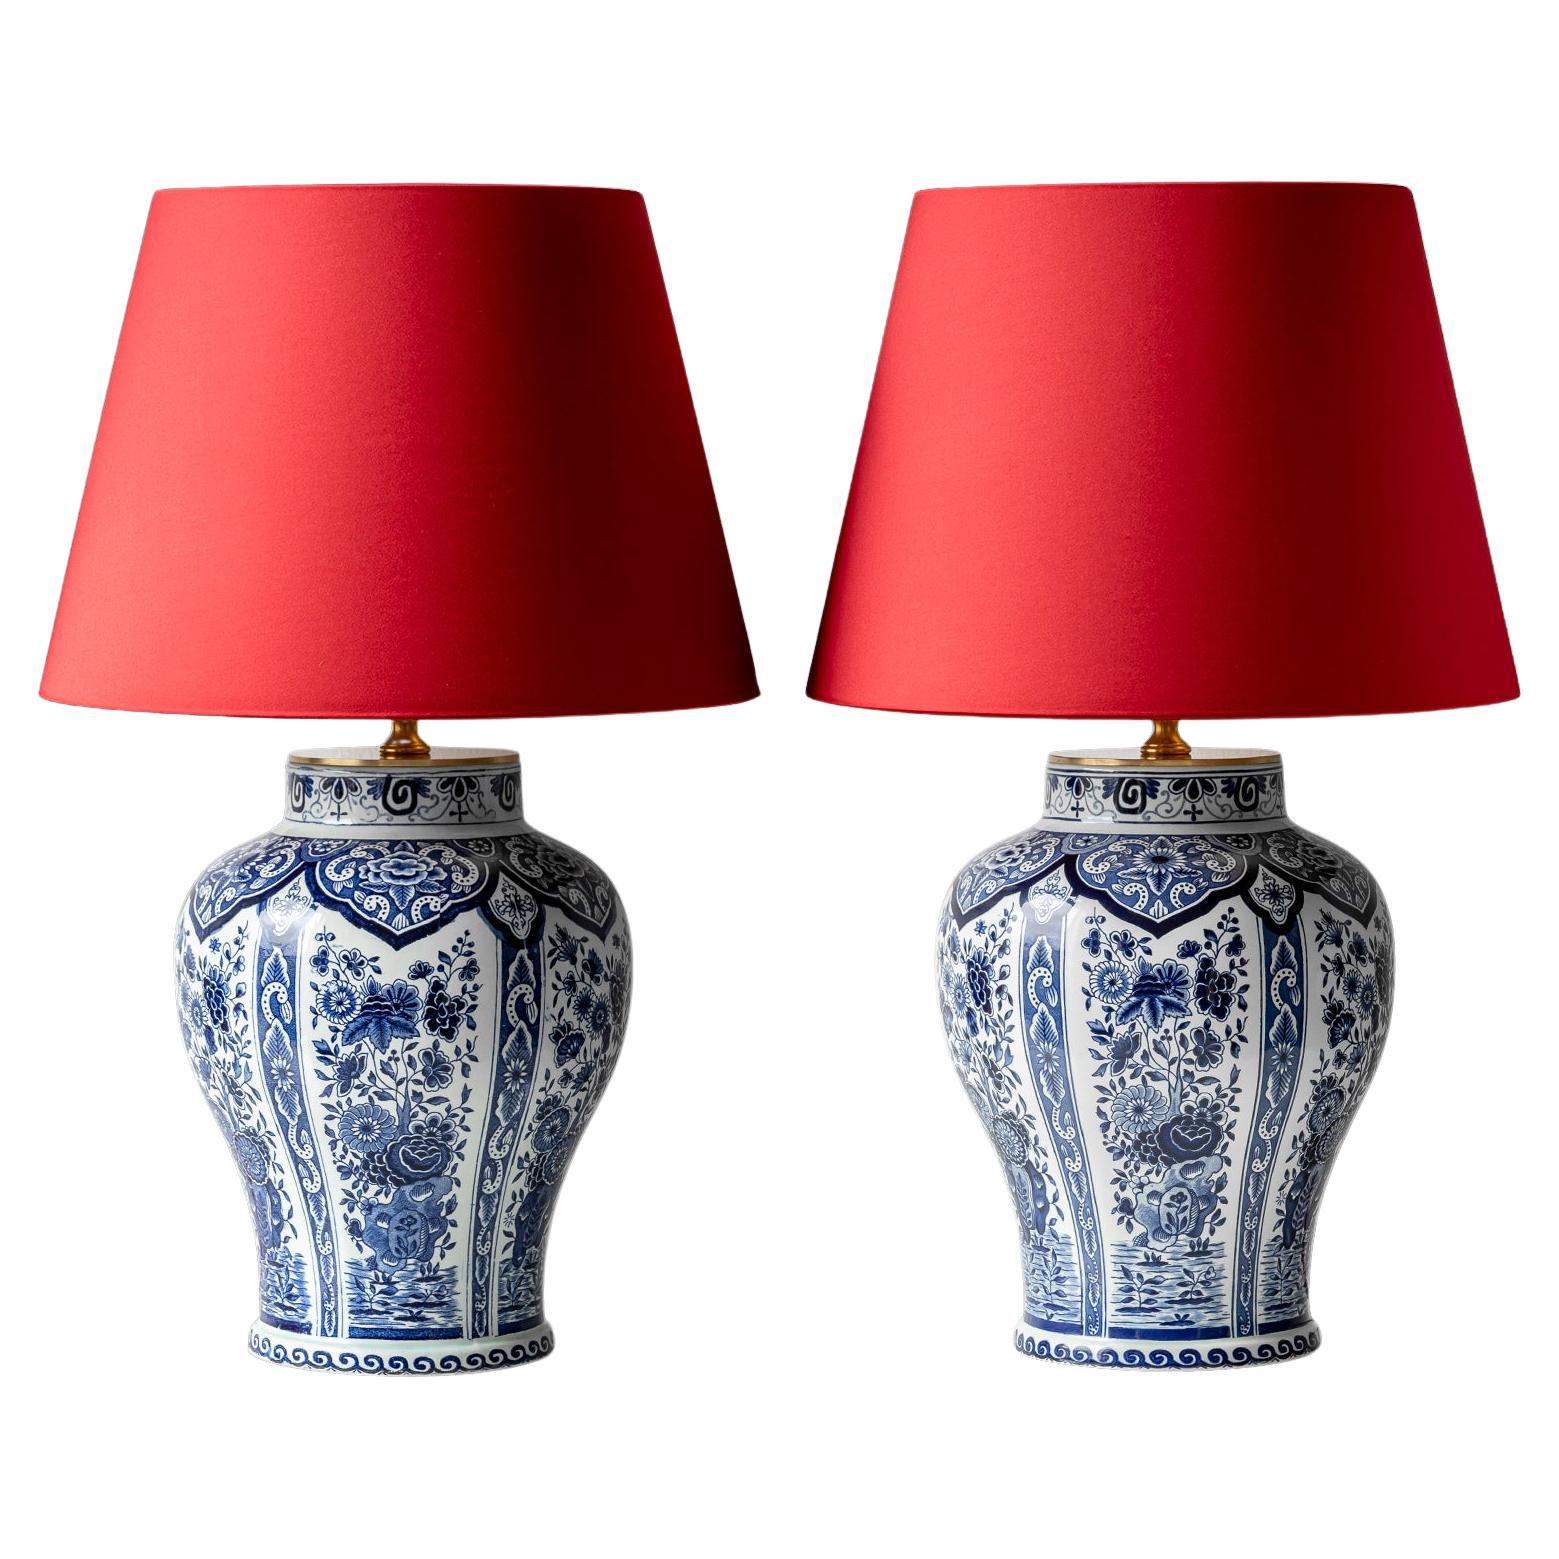 Delft Blue Boch Frères Keramis Table Lamps, 1969-1979, Red Satin Shades For Sale